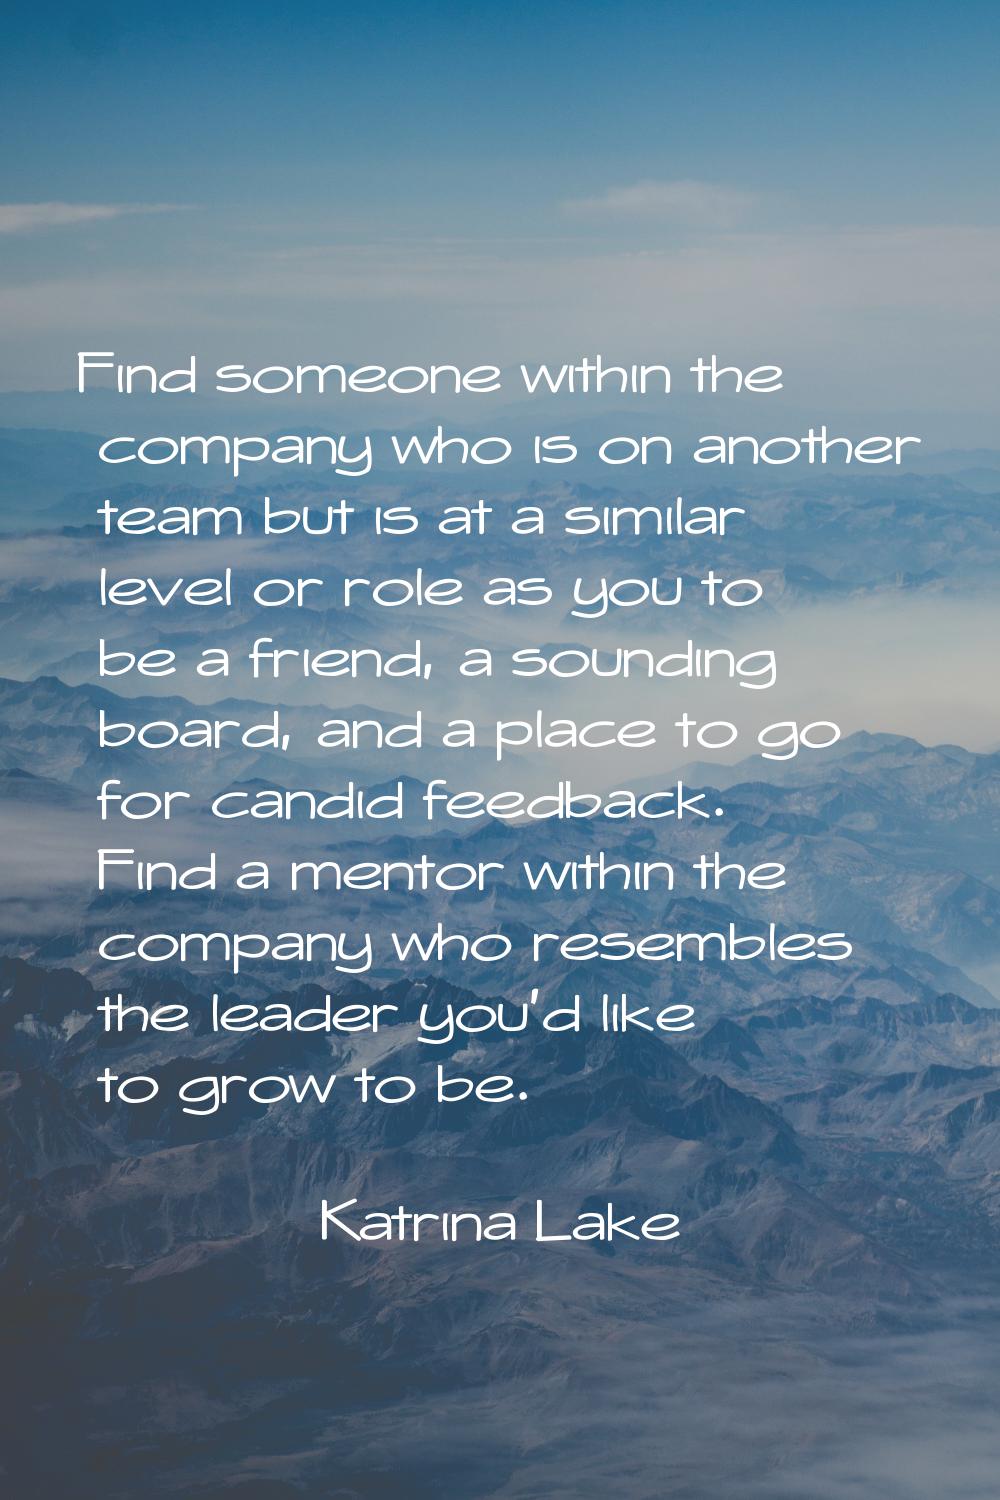 Find someone within the company who is on another team but is at a similar level or role as you to 